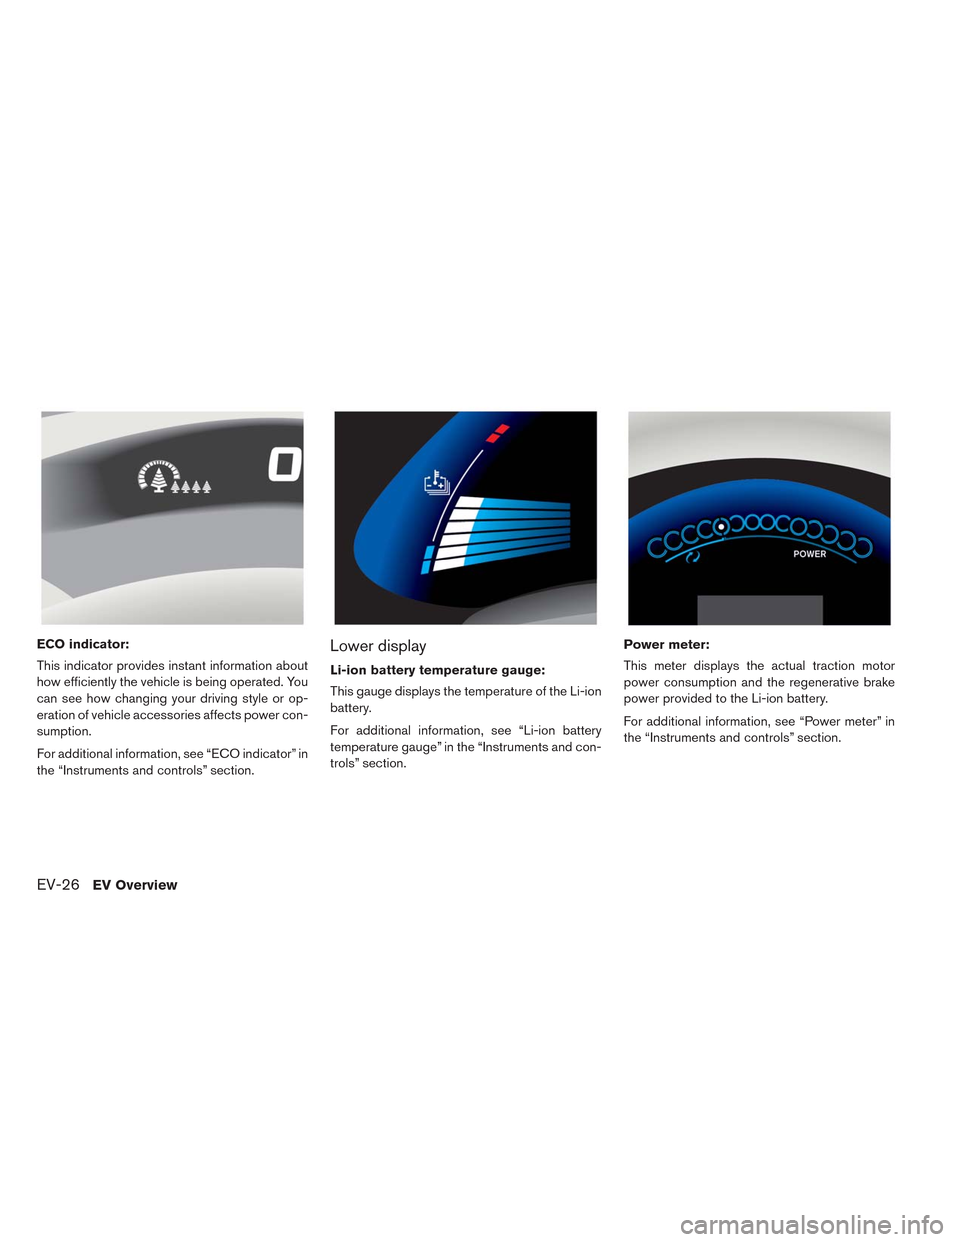 NISSAN LEAF 2014 1.G Owners Manual ECO indicator:
This indicator provides instant information about
how efficiently the vehicle is being operated. You
can see how changing your driving style or op-
eration of vehicle accessories affect